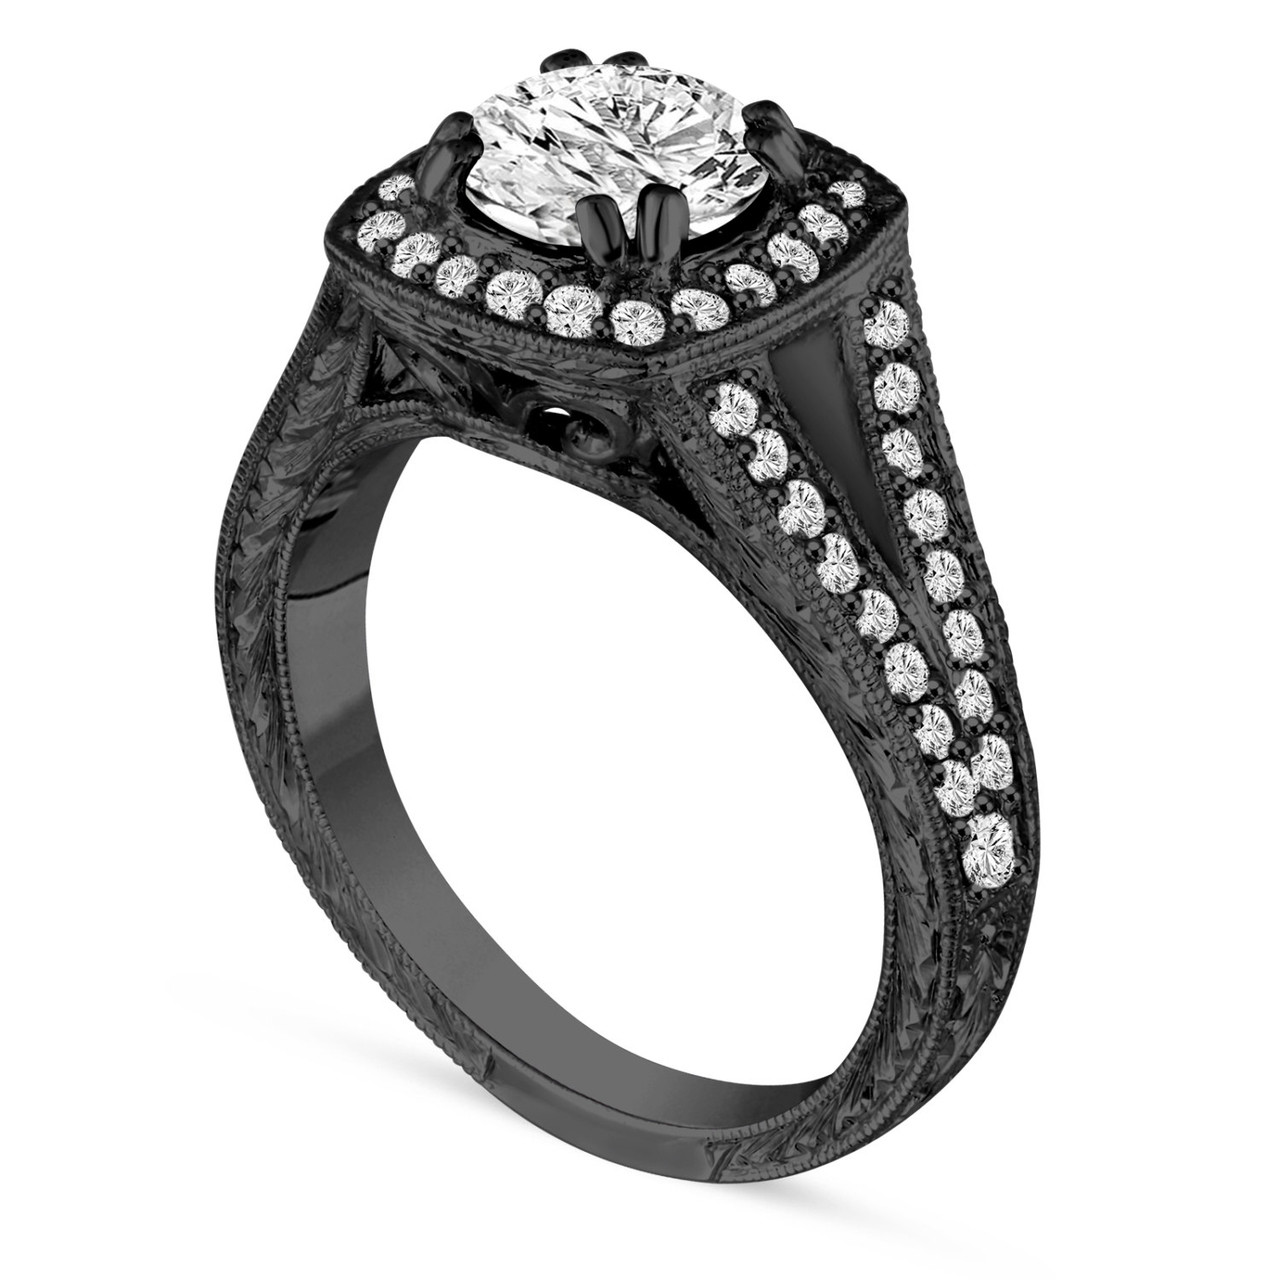 1.46 Carat Diamond Engagement Ring, Vintage Wedding Ring, Unique Antique  Style Hand Engraved 14K Black Gold GIA Certified Halo Pave handmade